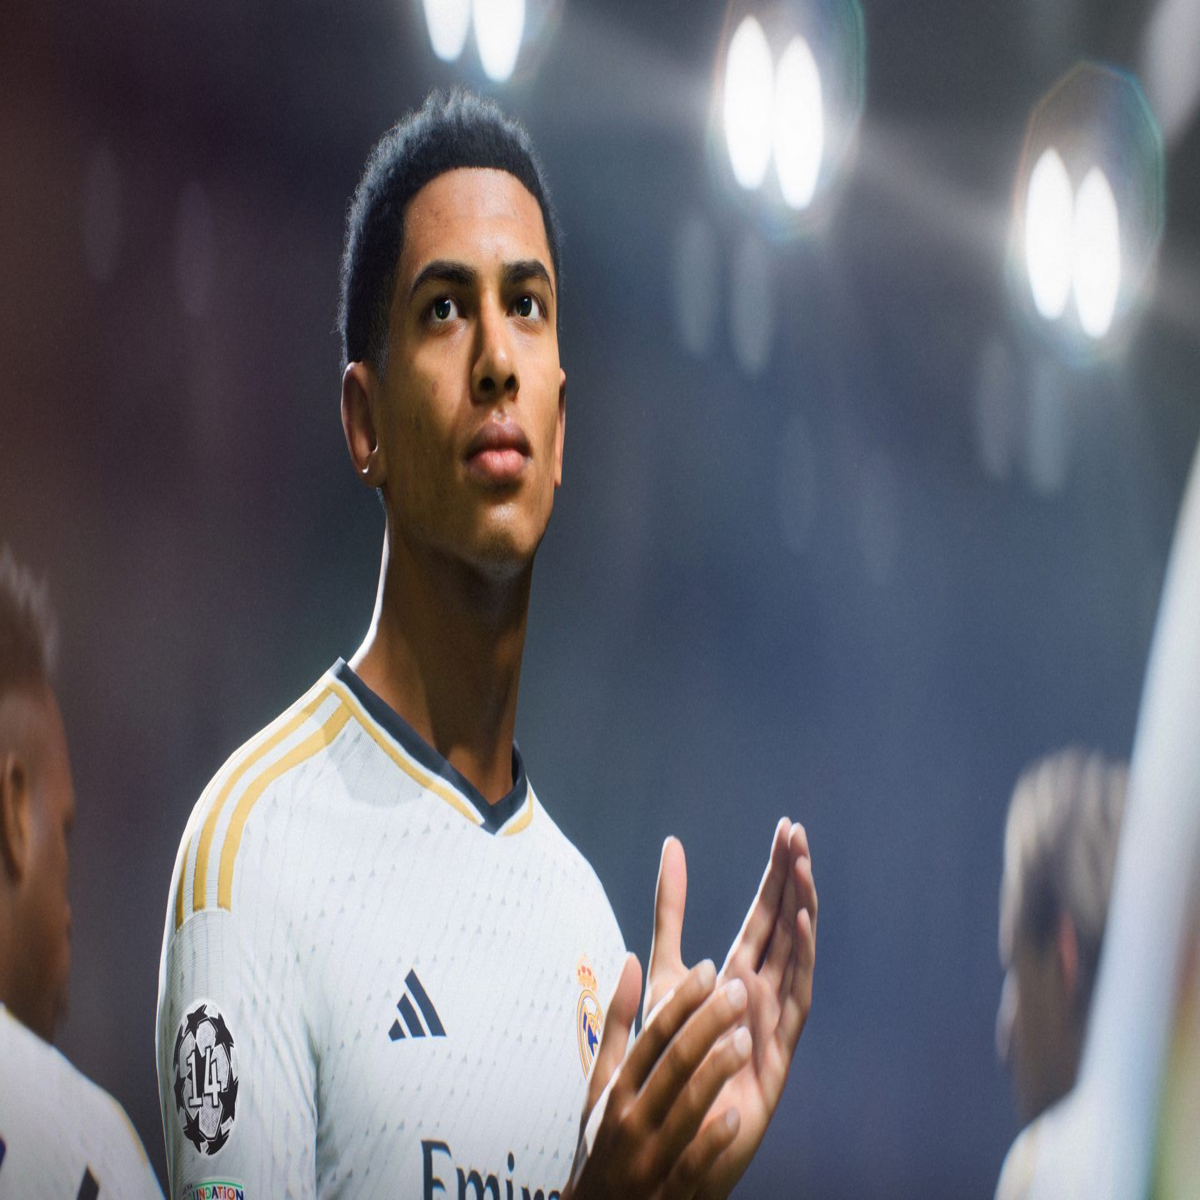 FIFA 22 best young players: Top prospects with highest potential rating in  Career Mode